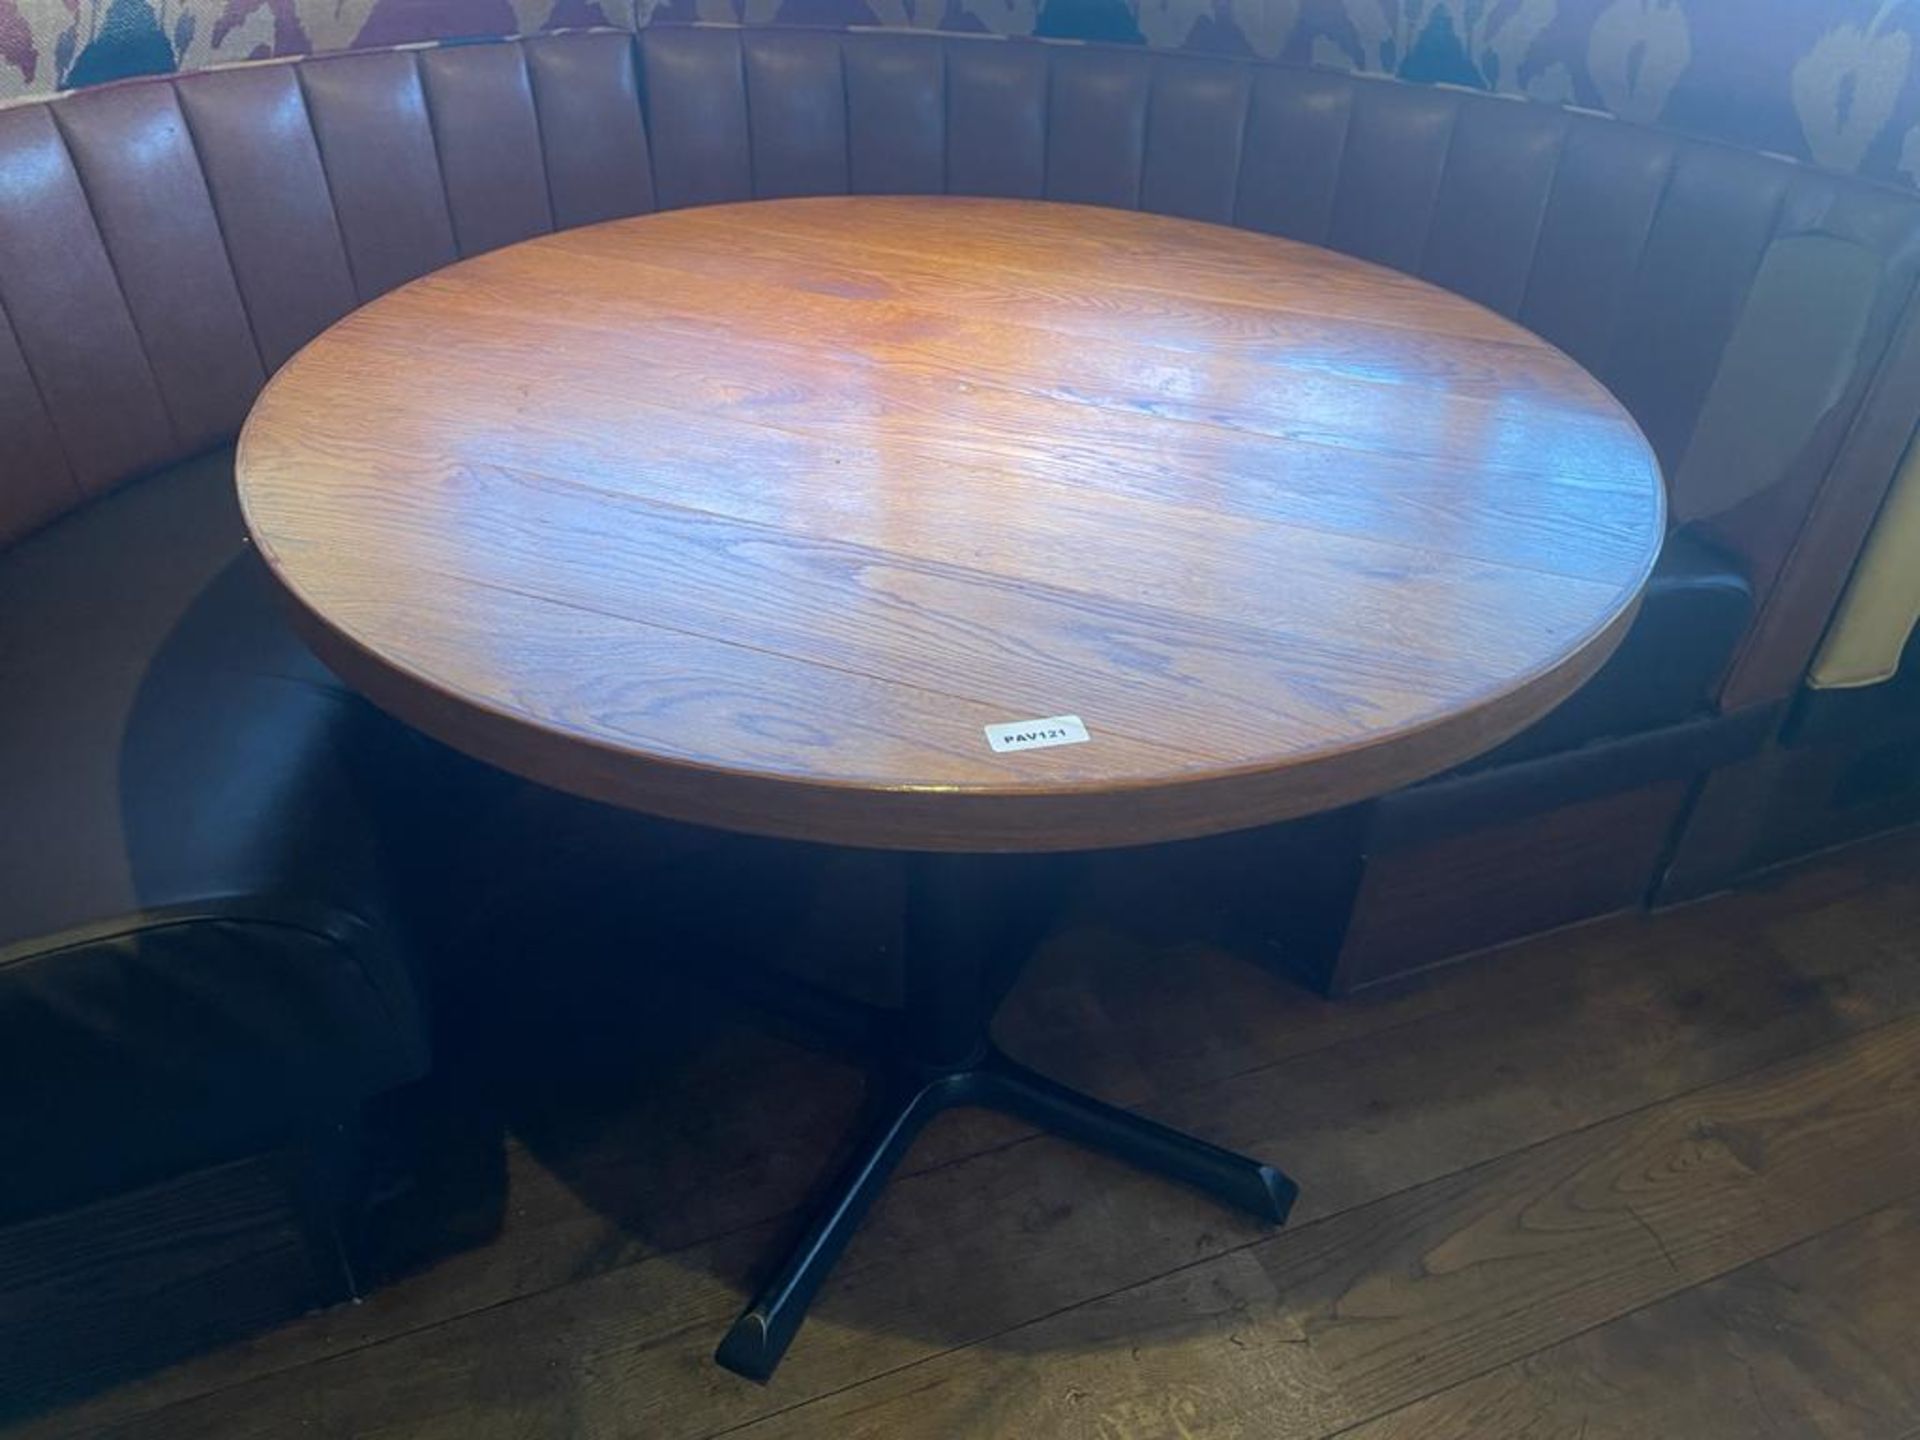 1 x Round Restaurant Dining Table With an Oak Top and Cast Iron Cross Leg Base - Diameter 100cms - - Image 2 of 5